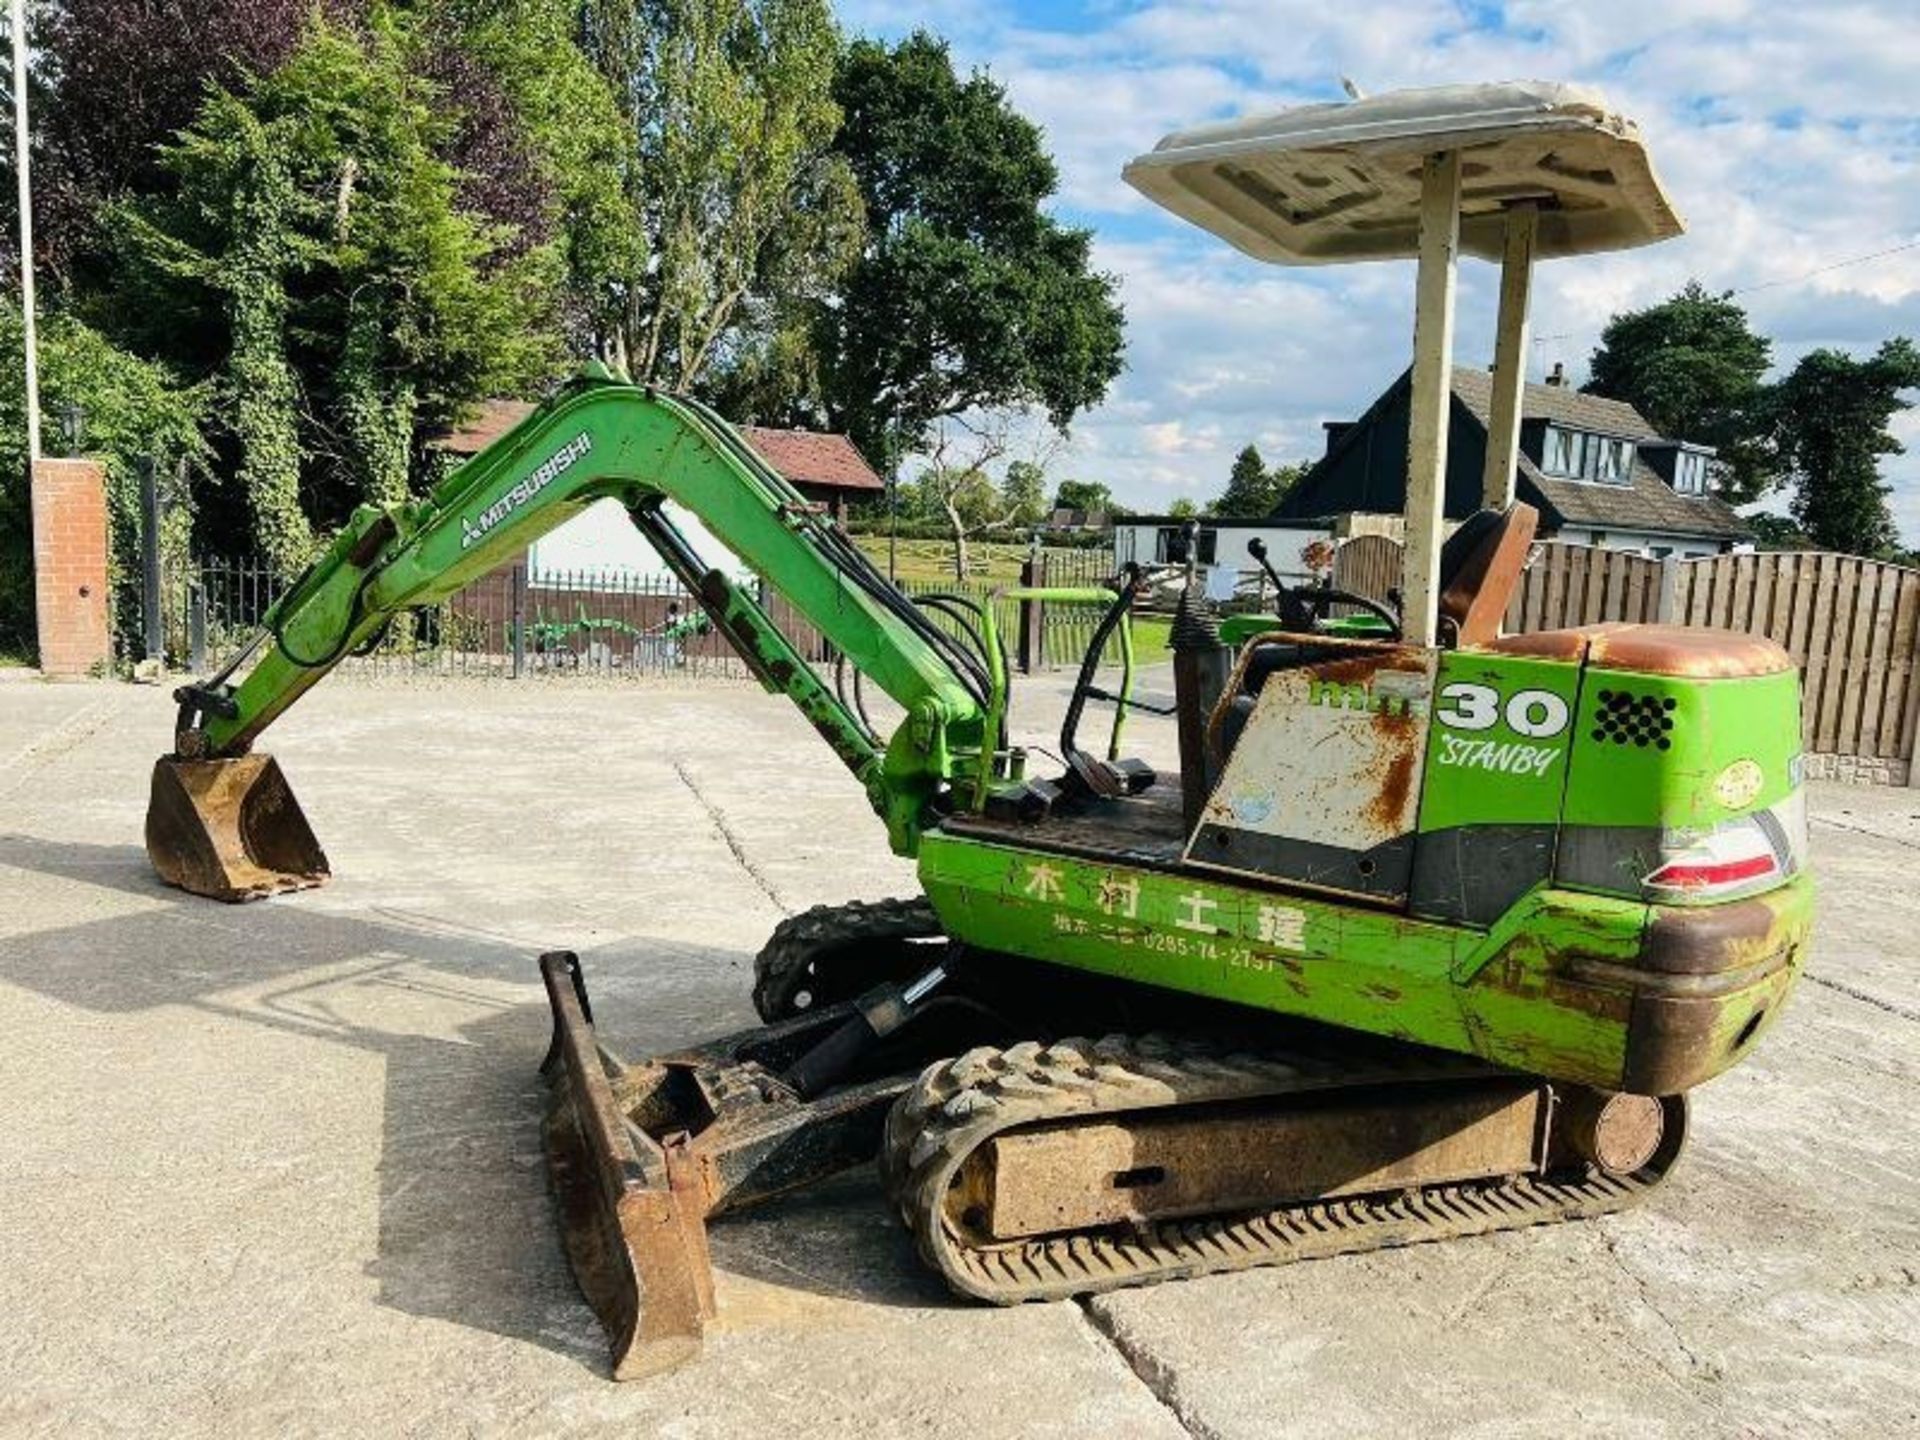 MITSUBISHI 30 TRACKED EXCAVATOR C/W RUBBER TRACKS , ROLE BAR AND CANOPY - Image 4 of 12